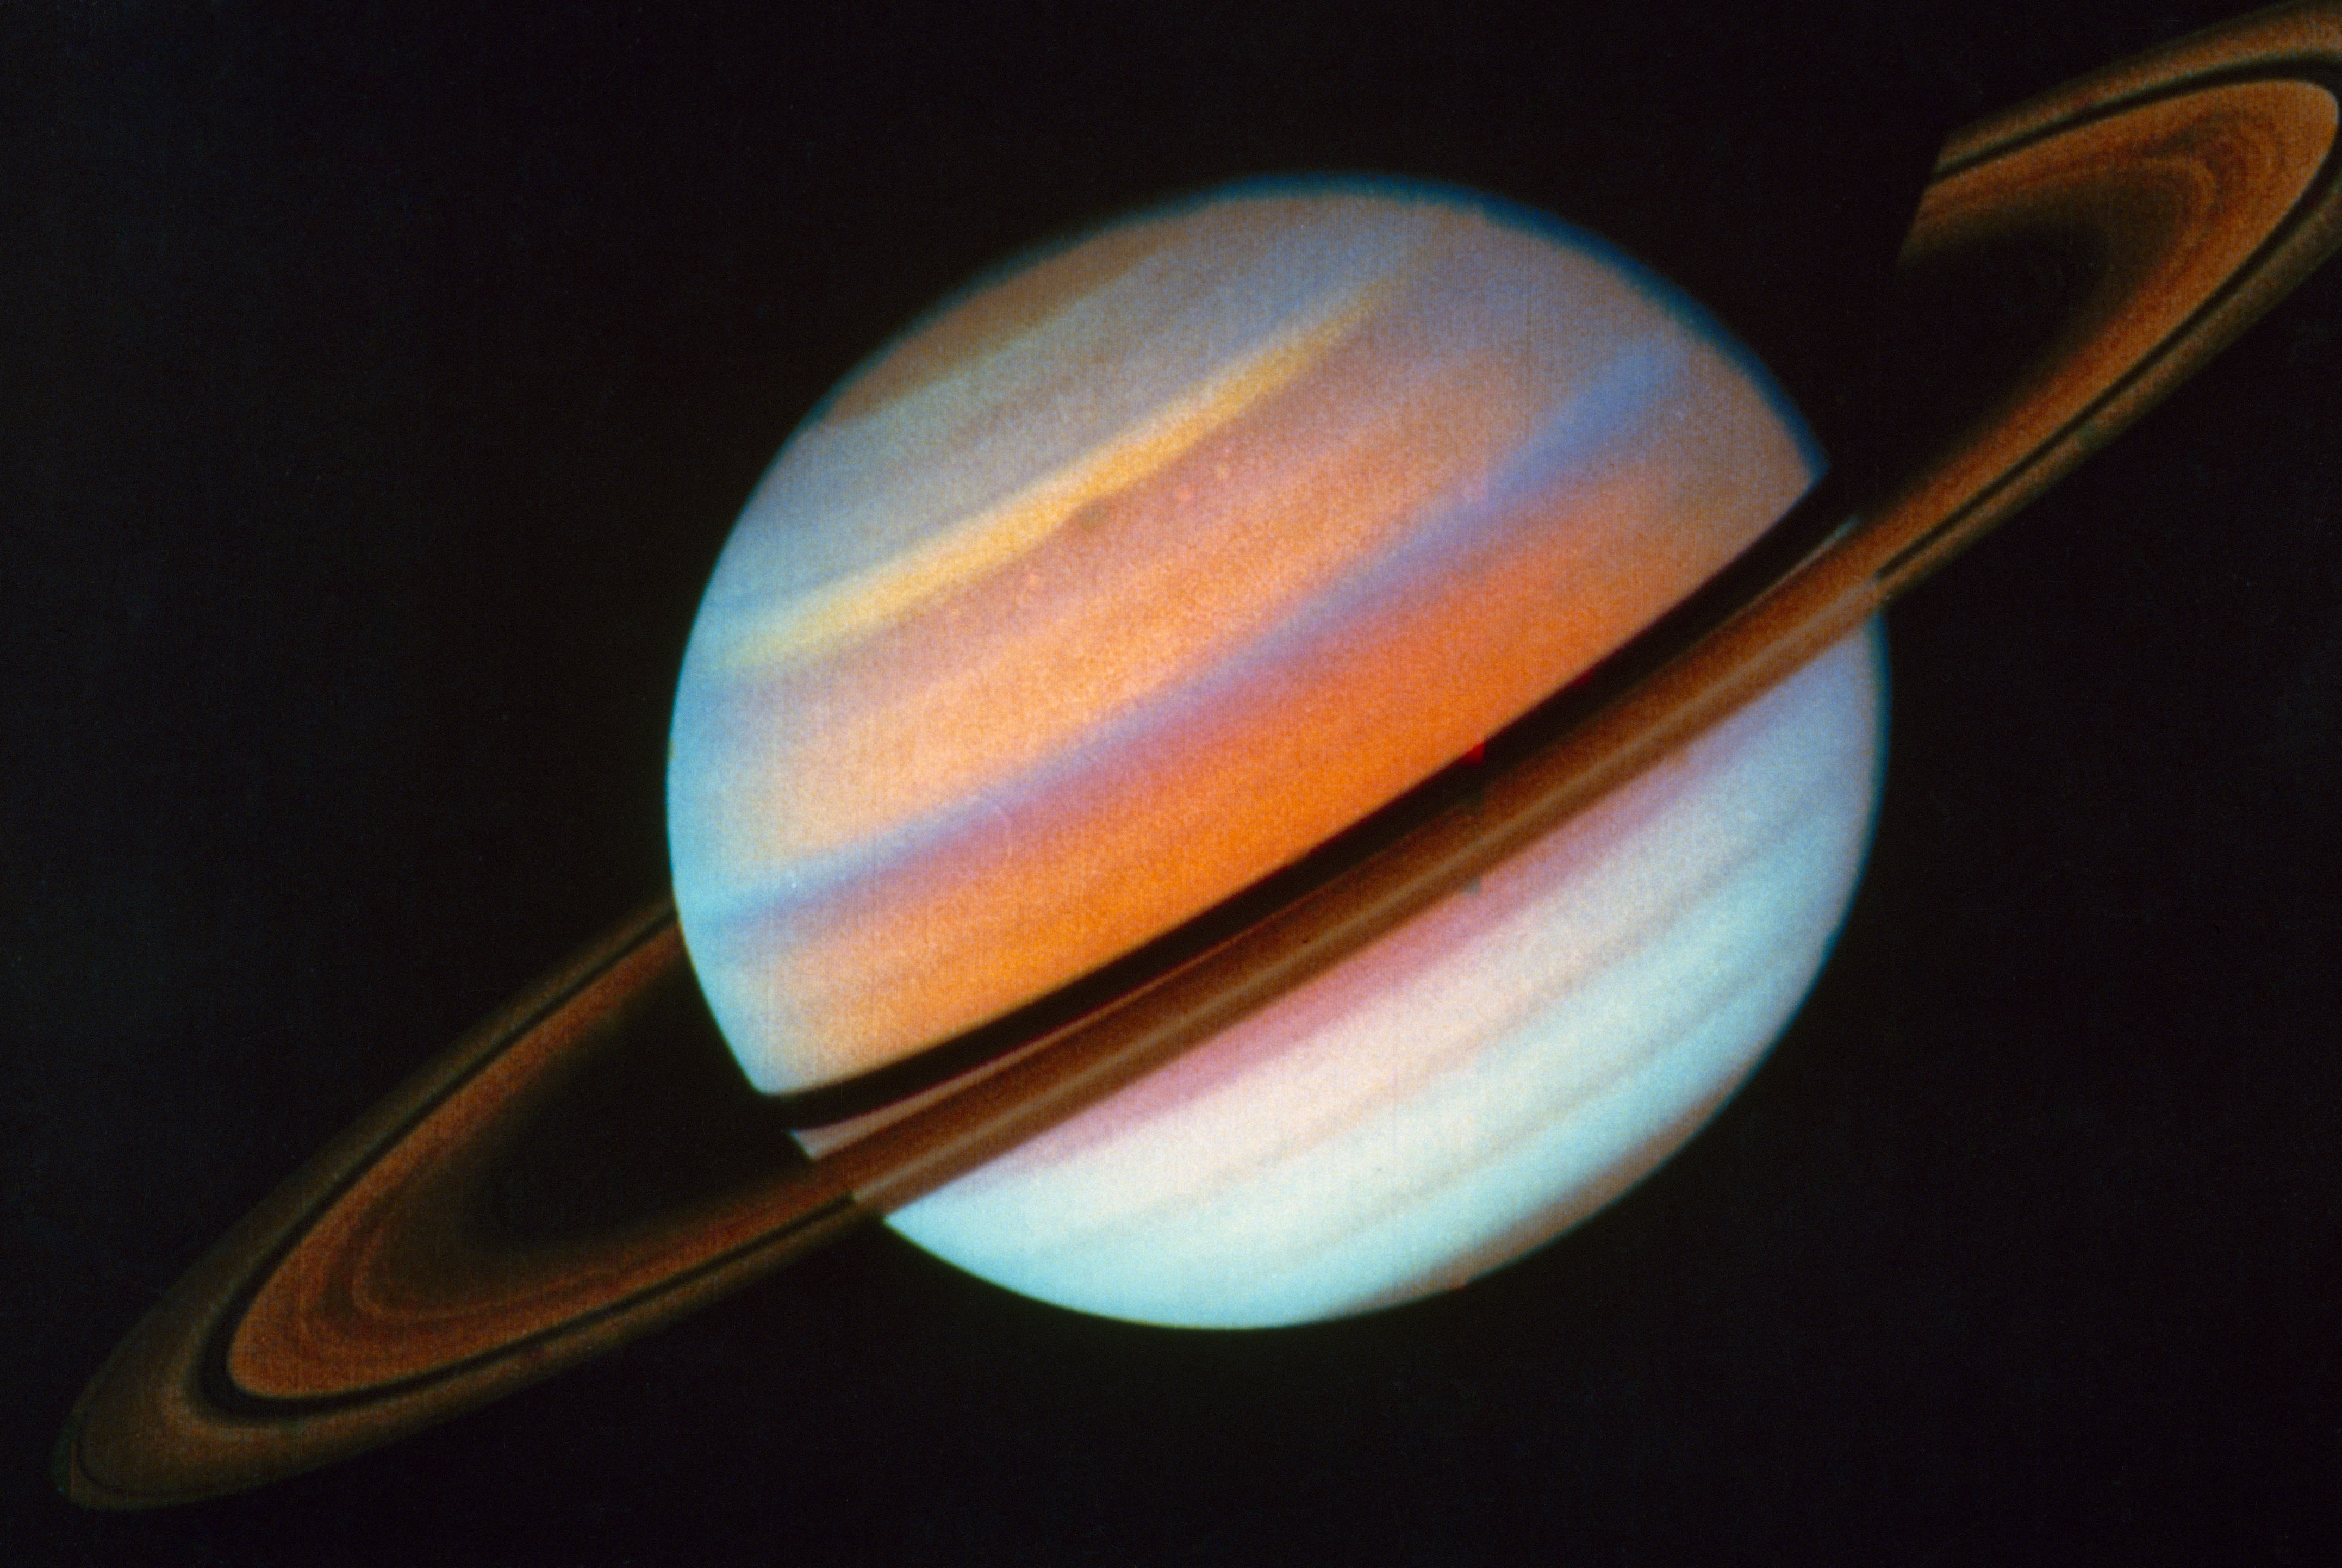 35th Anniversary of the Voyager 1 Saturn Flyby | NASA